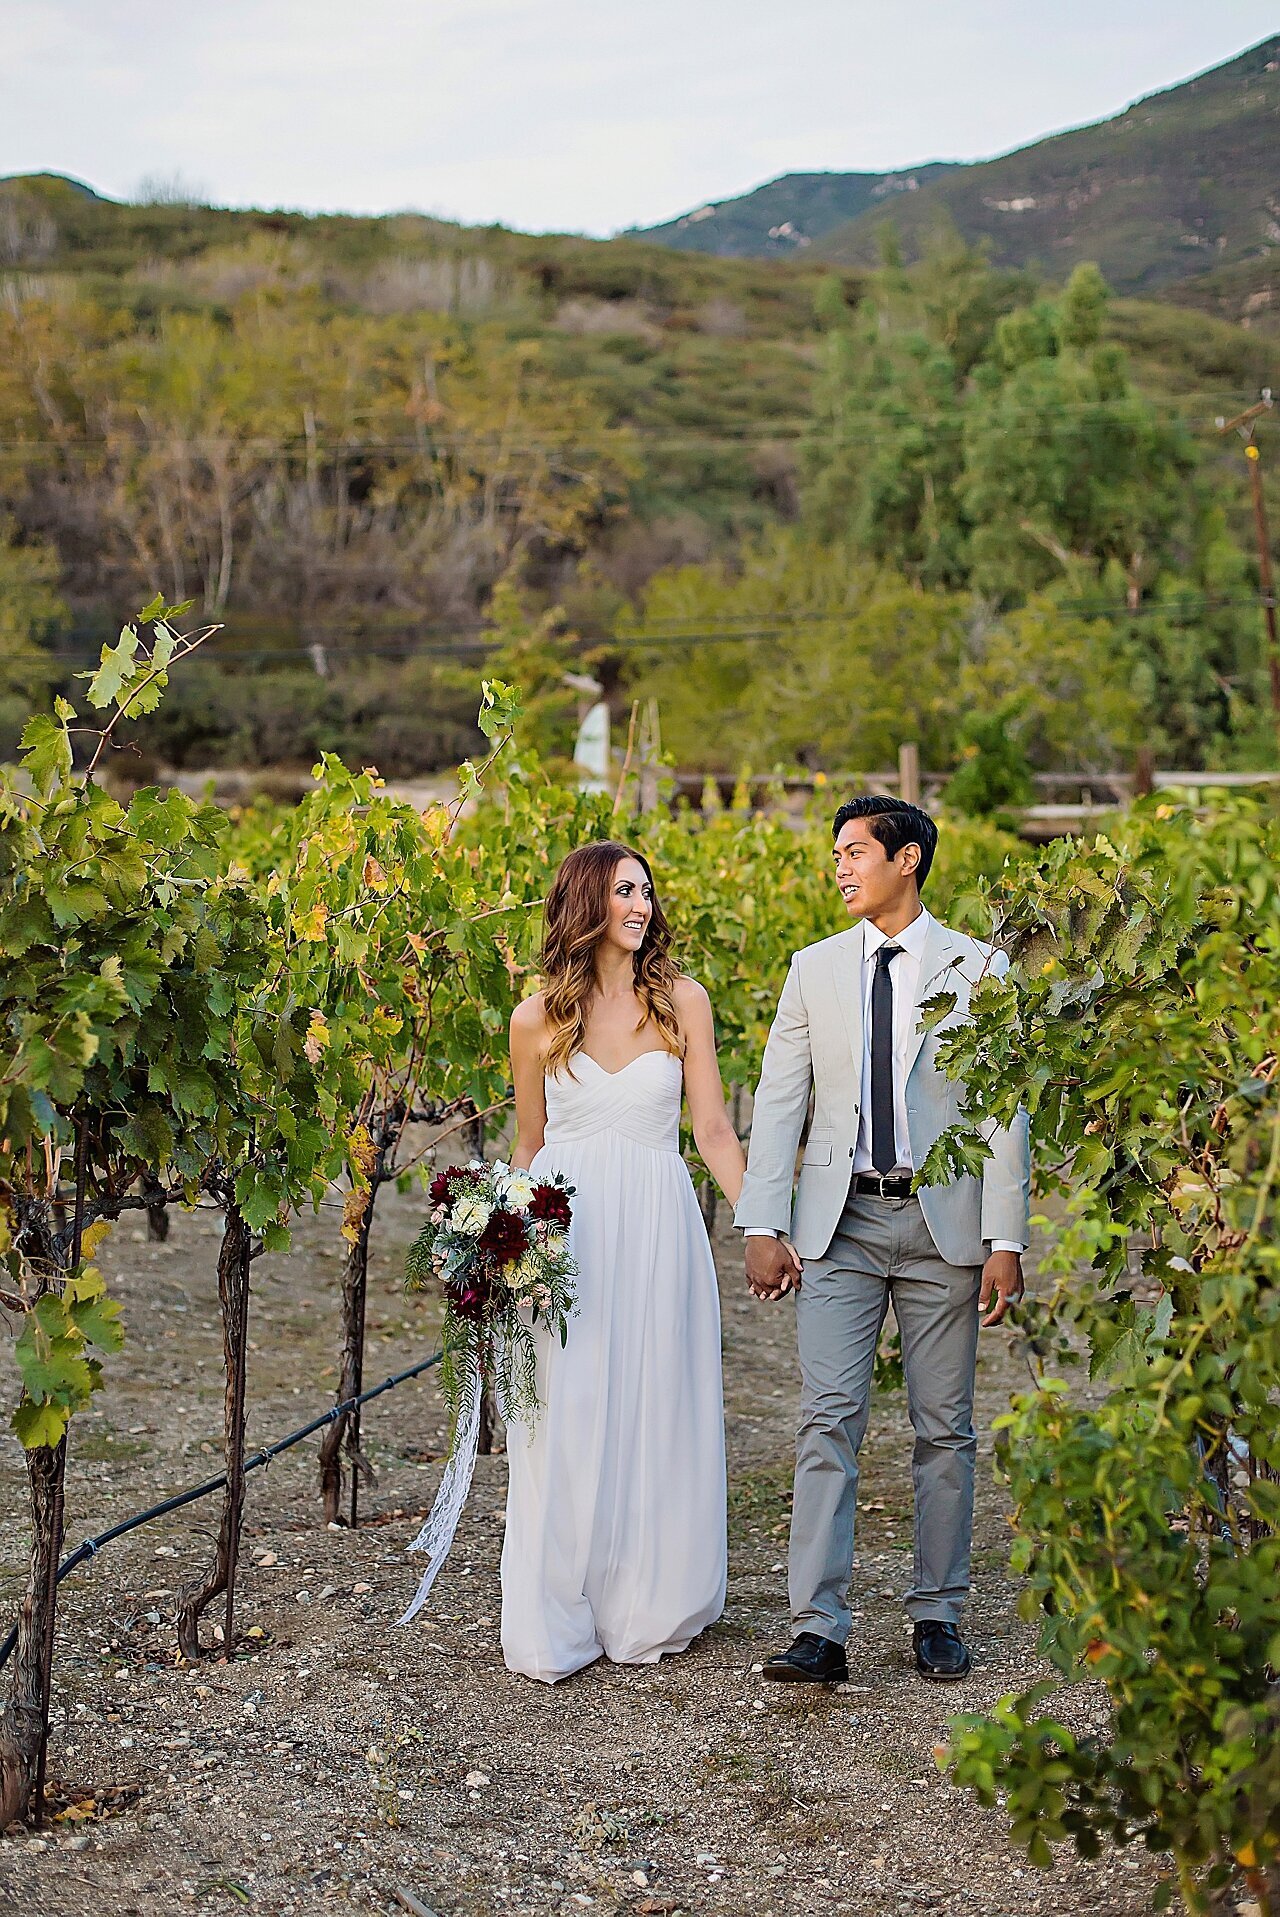 MIchelle Peterson Photography Redlands California wedding and portrait photographer_1058